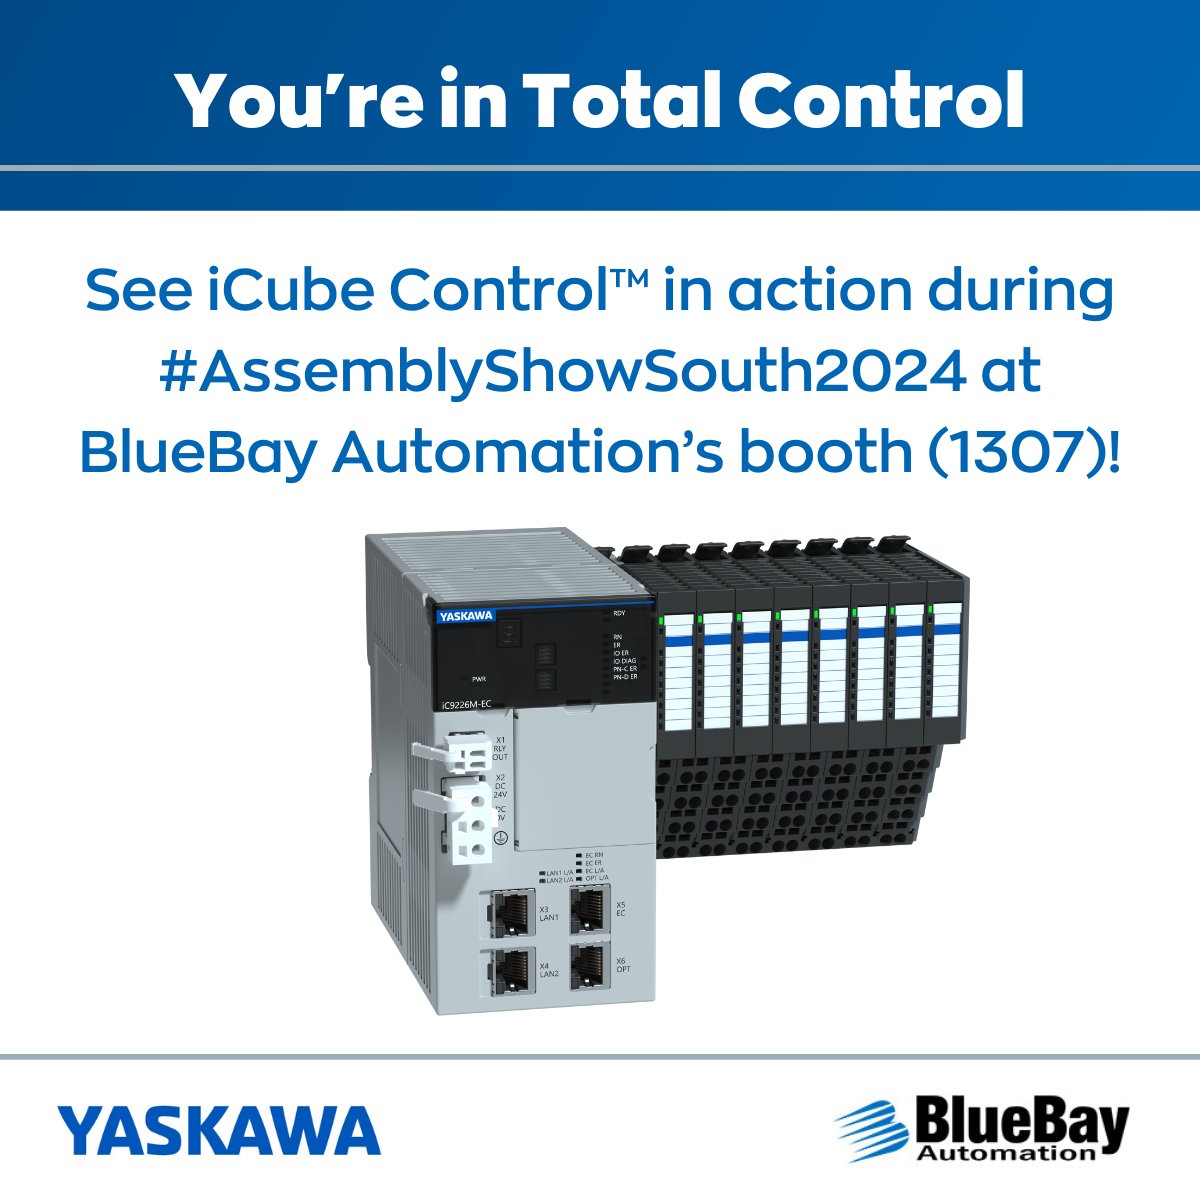 💪 See what total control looks like during #ASSEMBLYShowSouth! Stop by BlueBay Automation's booth (1307) to see #iCubeControl in action within their T-bot demo. #WeAreYaskawa #Yaskawa #BlueBayAutomation @AssemblyMag1 @BB_Automate